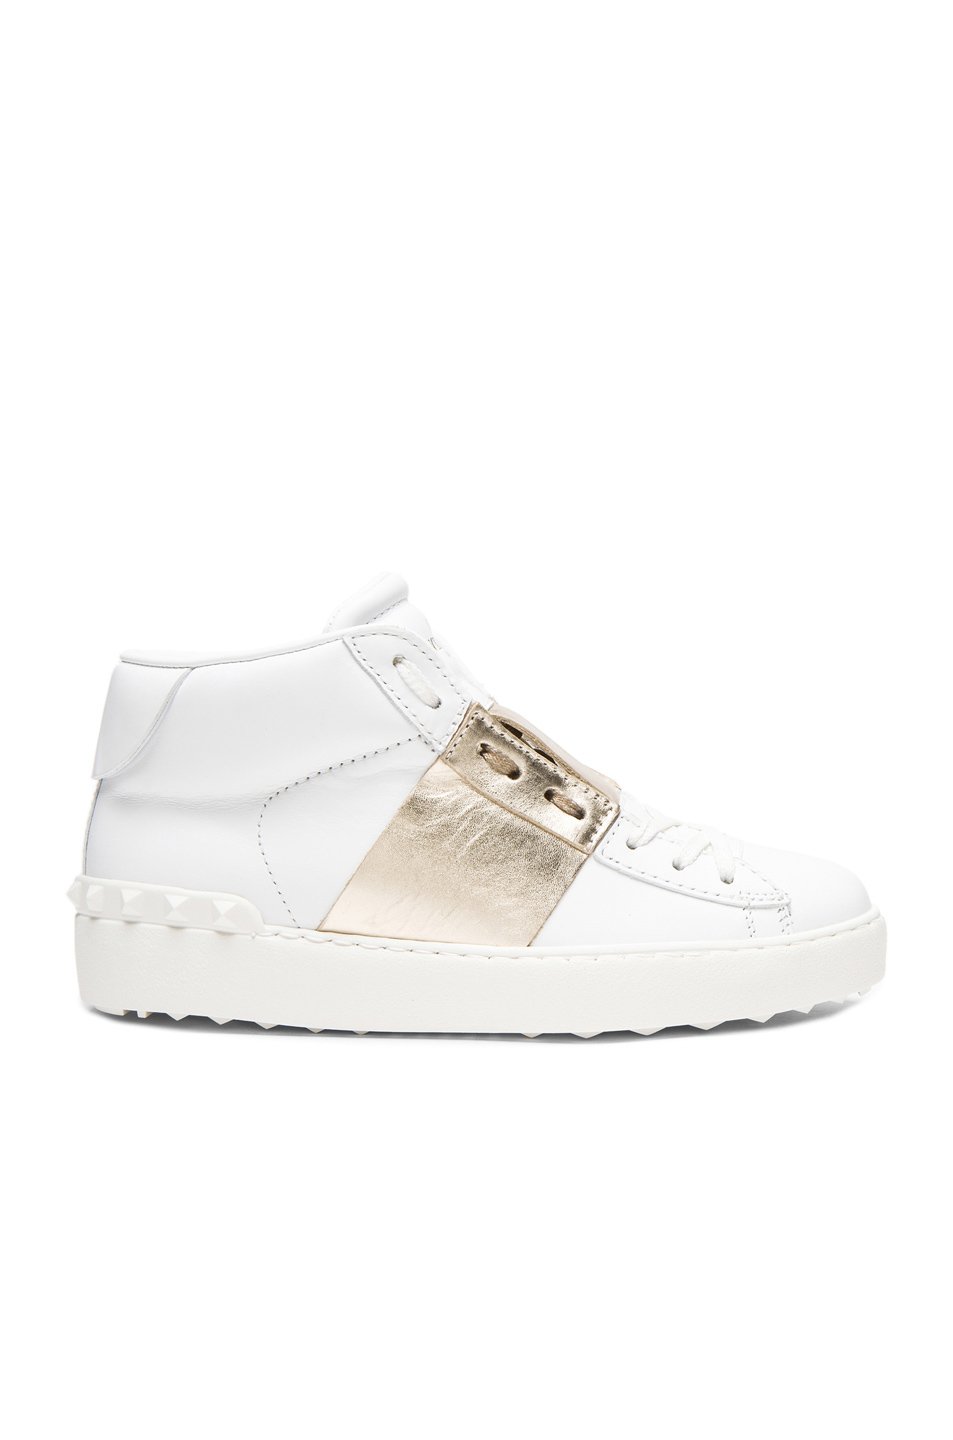 Valentino Rockstud Stripe High-Top Sneakers in White Gold.jpeg